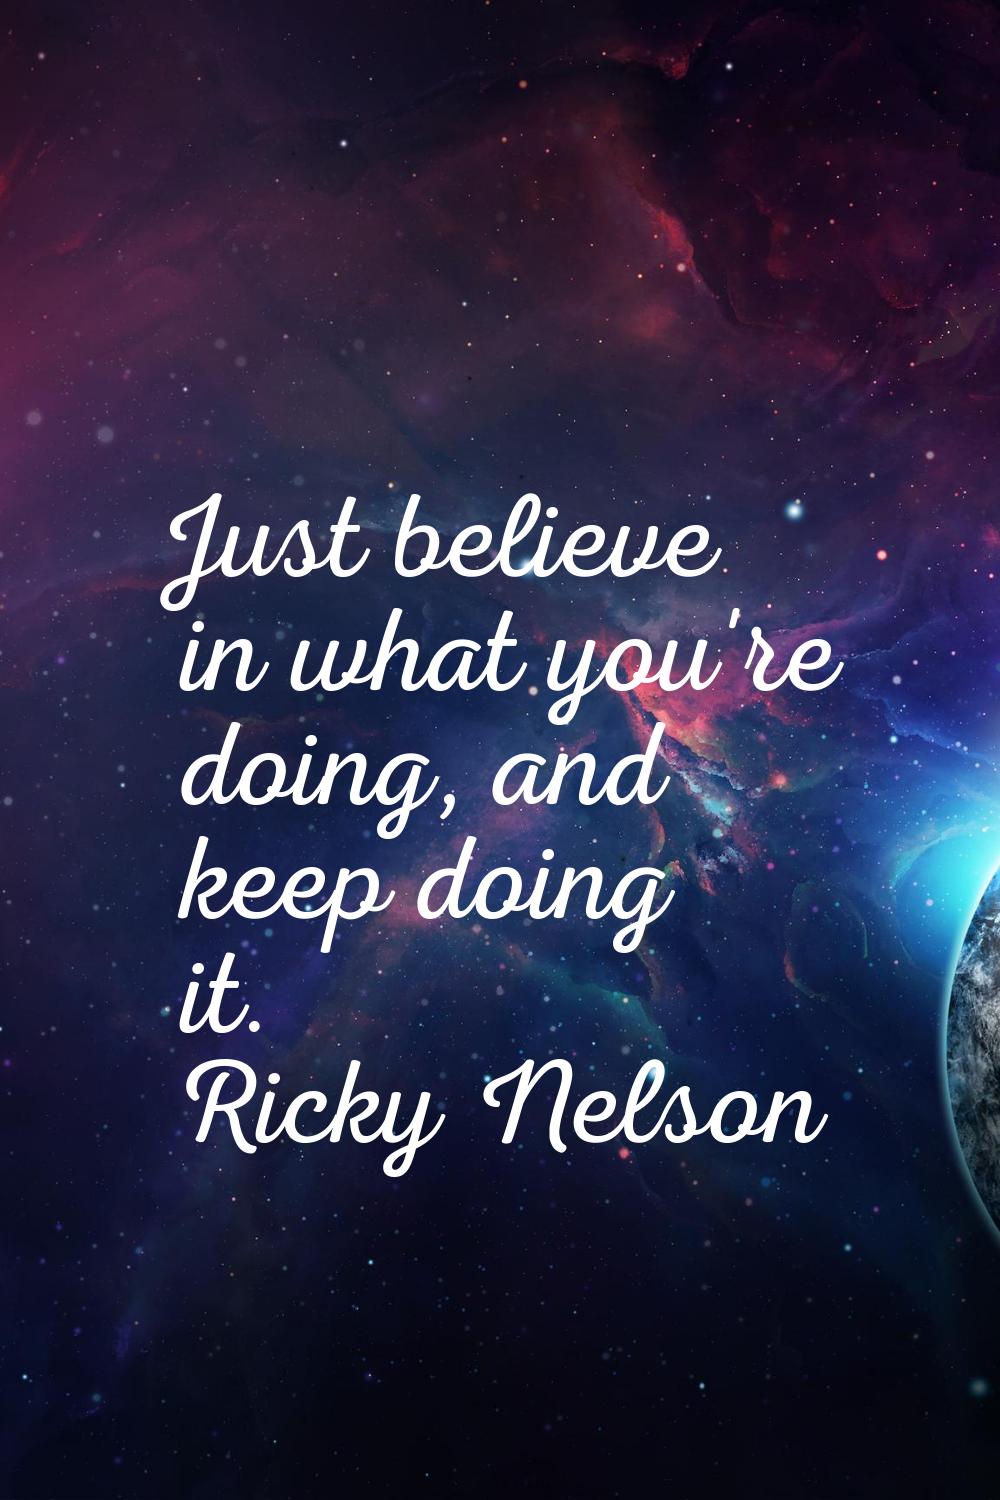 Just believe in what you're doing, and keep doing it.